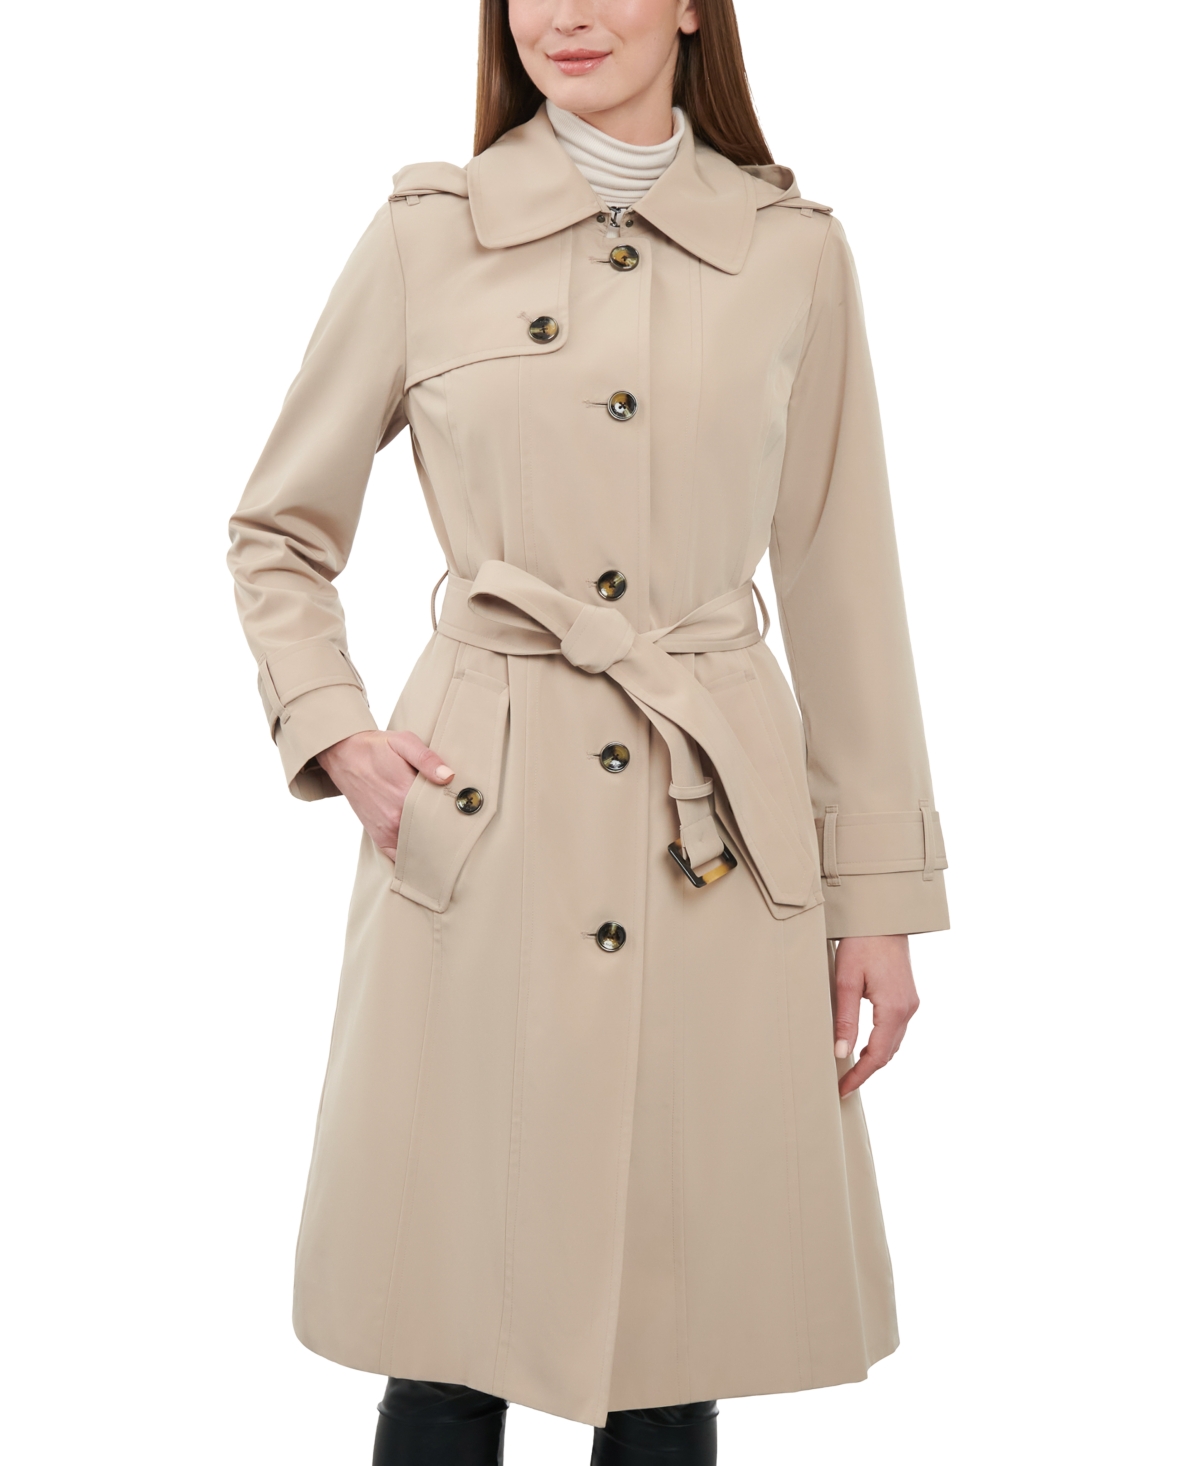 London Fog Women's Single-Breasted Hooded Trench Coat